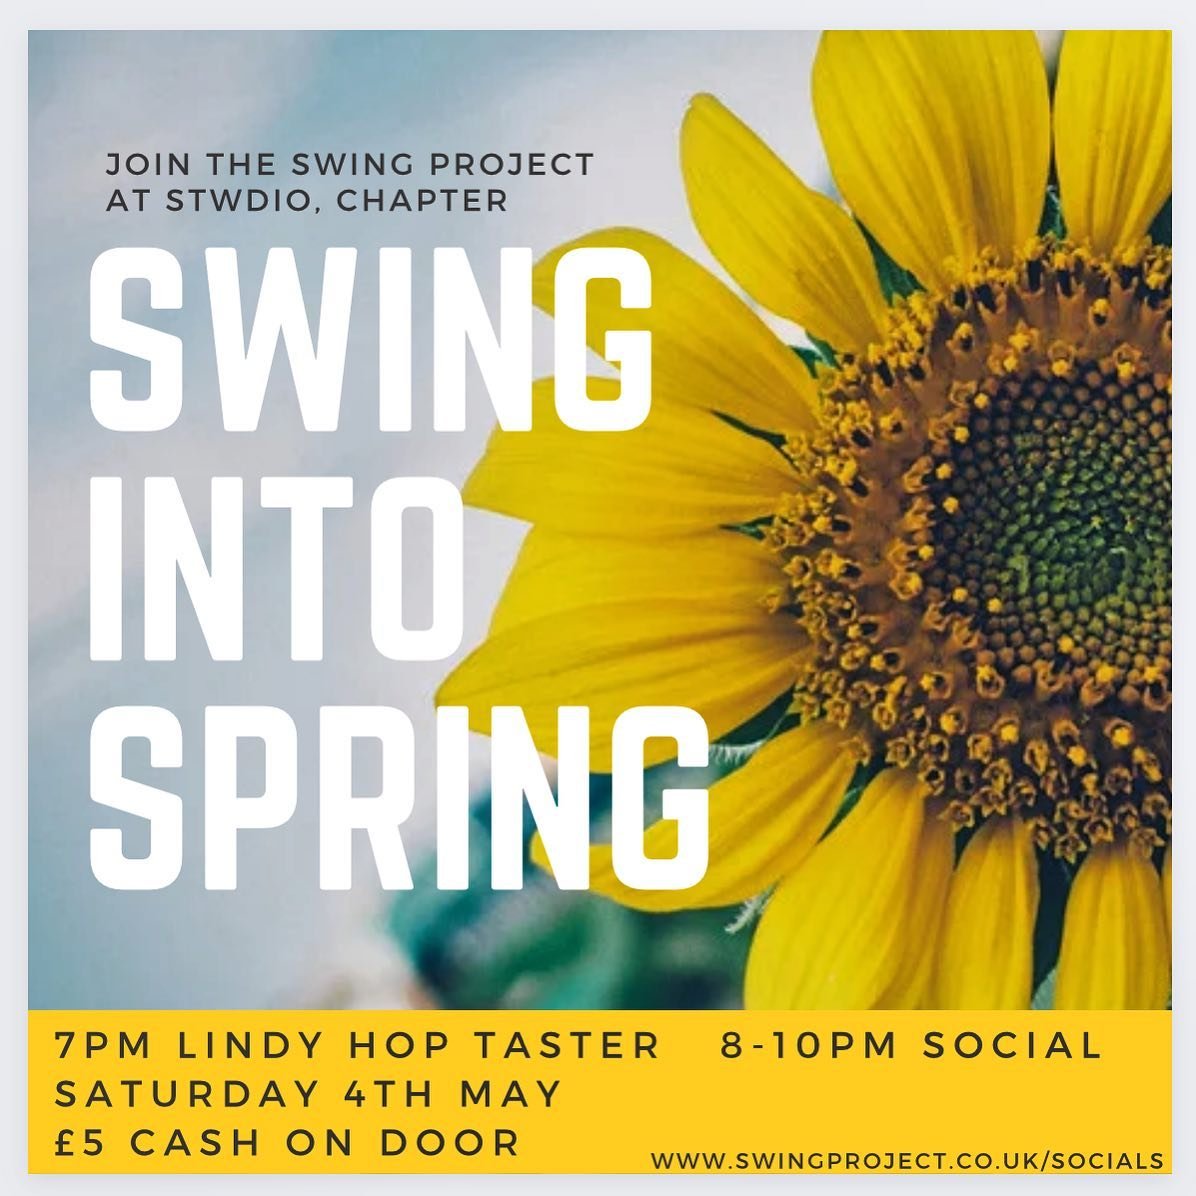 Fancy a treat this May Bank Holiday 🙌 
⁣
Join us on Saturday 4th May for&hellip;
⁣
🍃 🎶 💐 Swing into Spring 💐 🎶 🍃 

We&rsquo;re taking over the enormous Stwdio at Chapter for a night of swingin&rsquo; tunes and great dancing and we want you to 